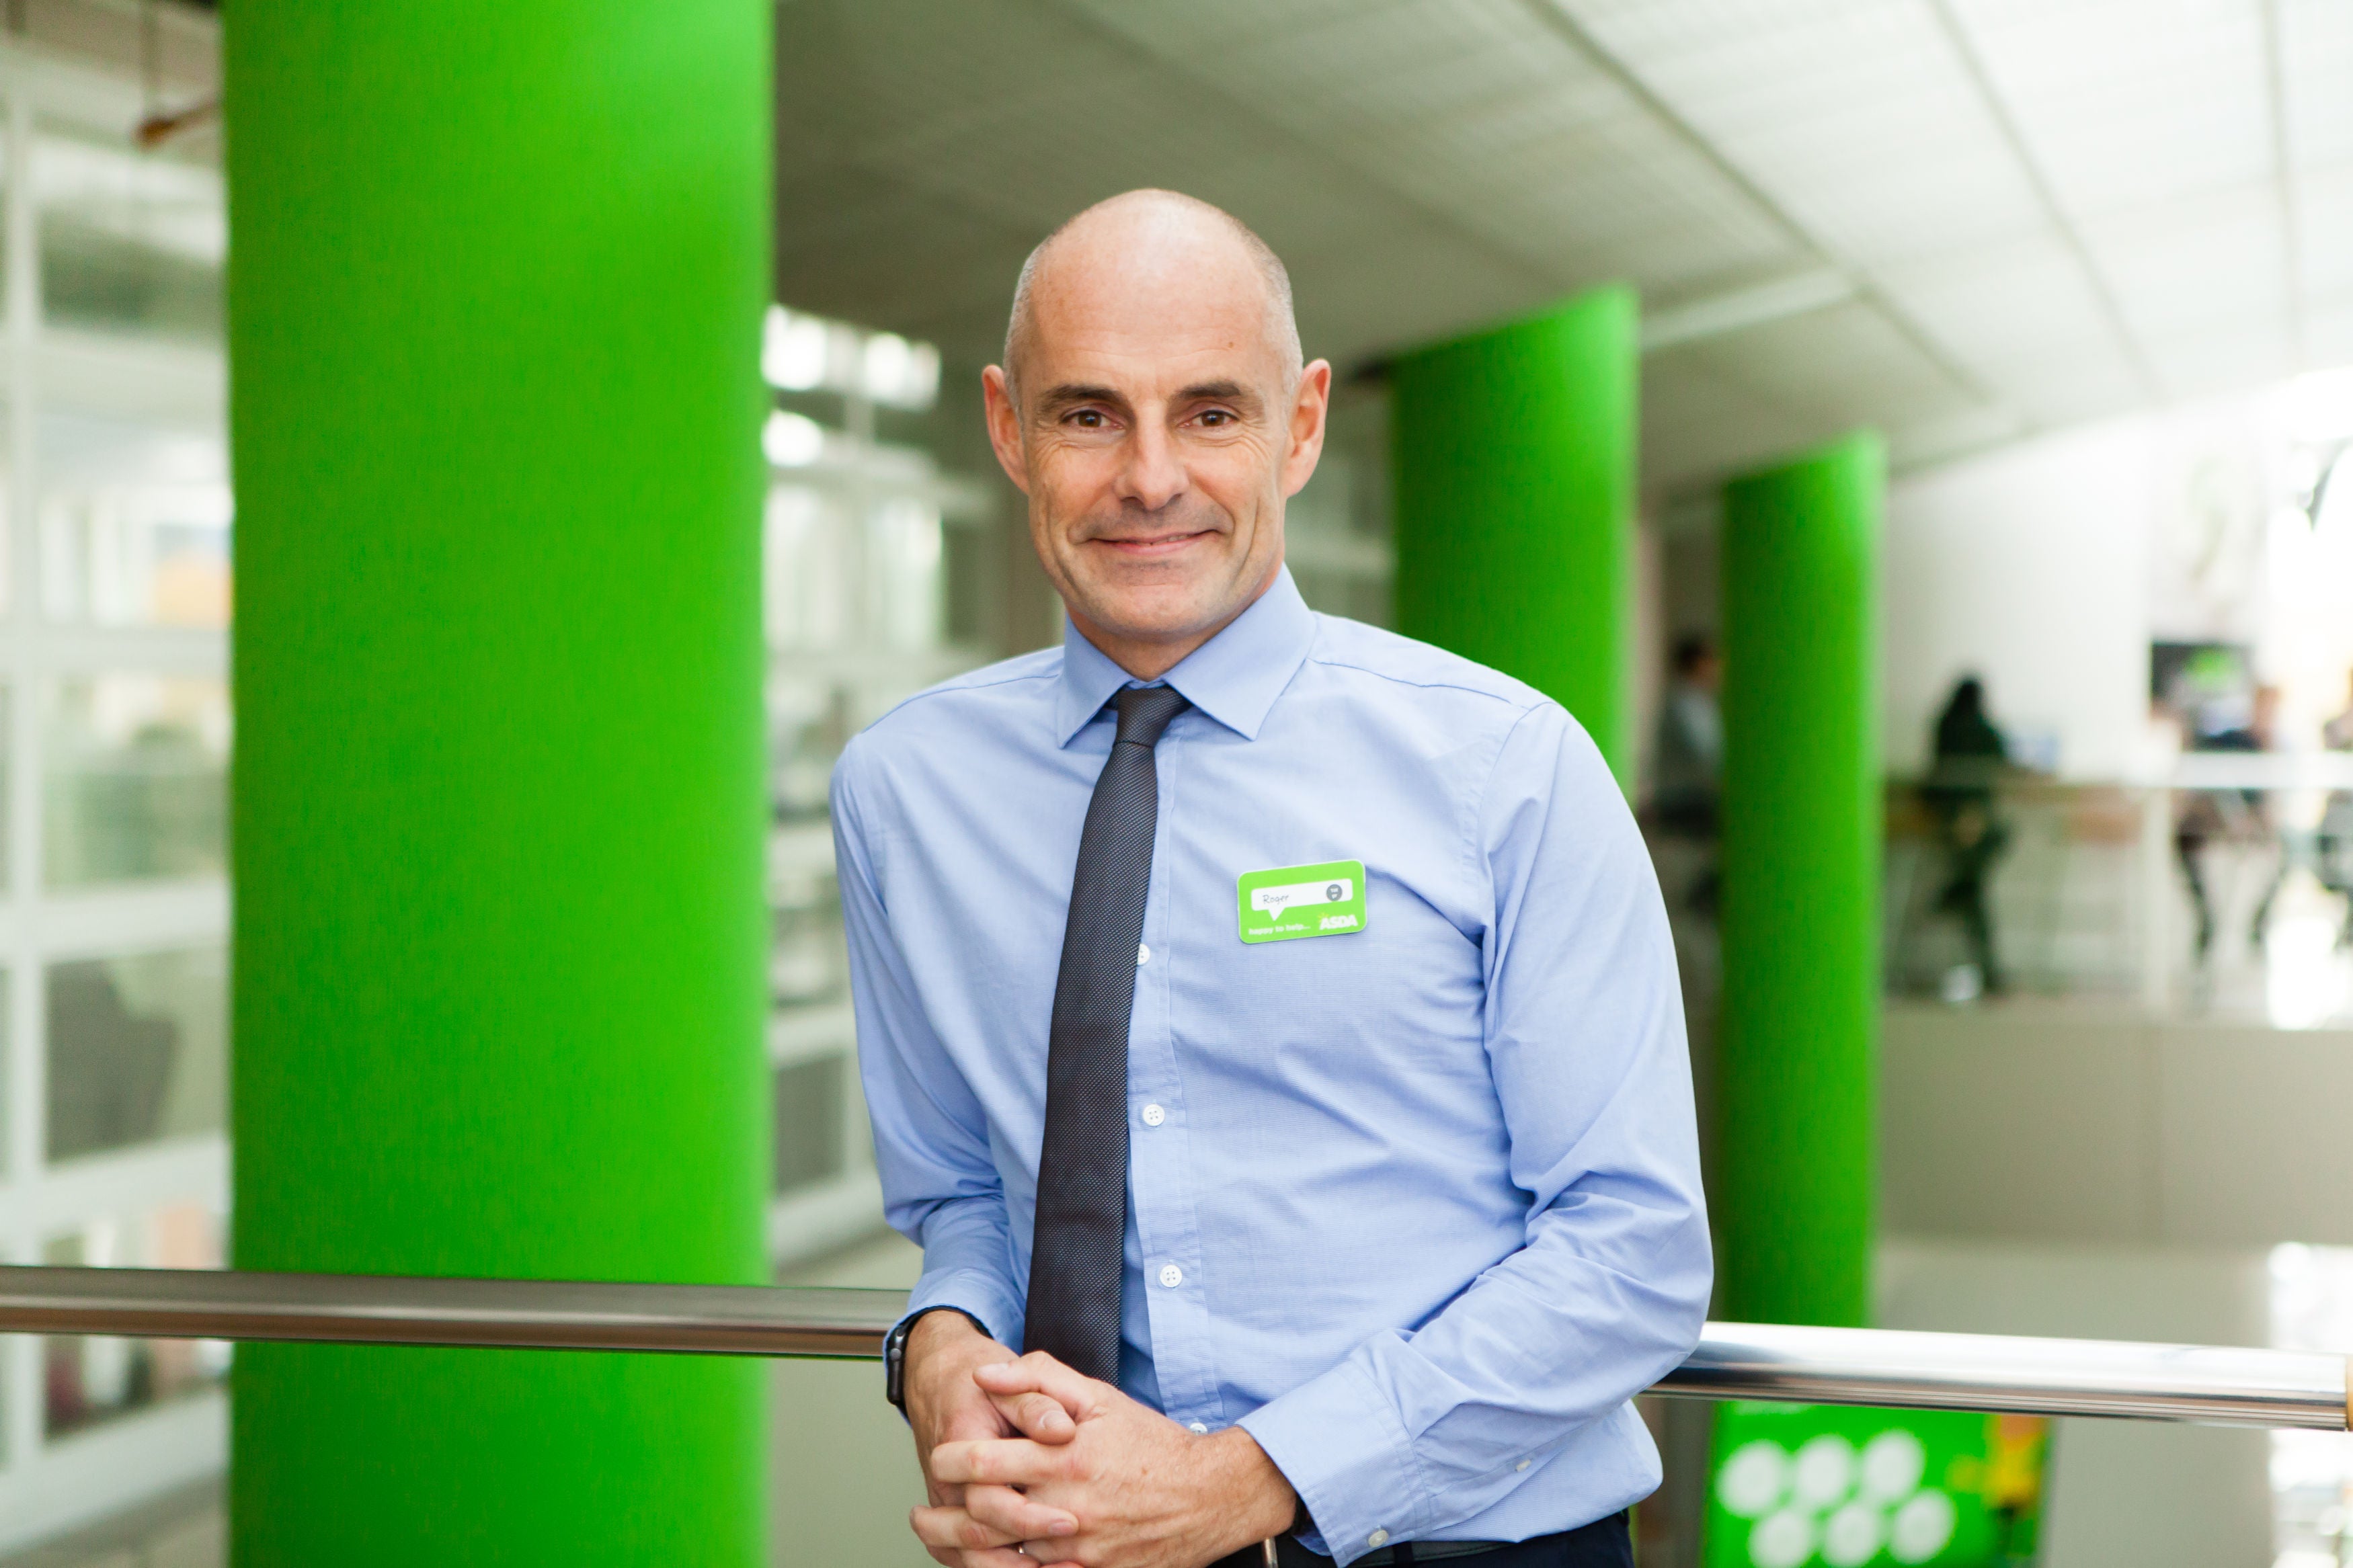 Asda boss Roger Burnley has prematurely stepped down from his top role at the supermarket chain (Asda/PA)